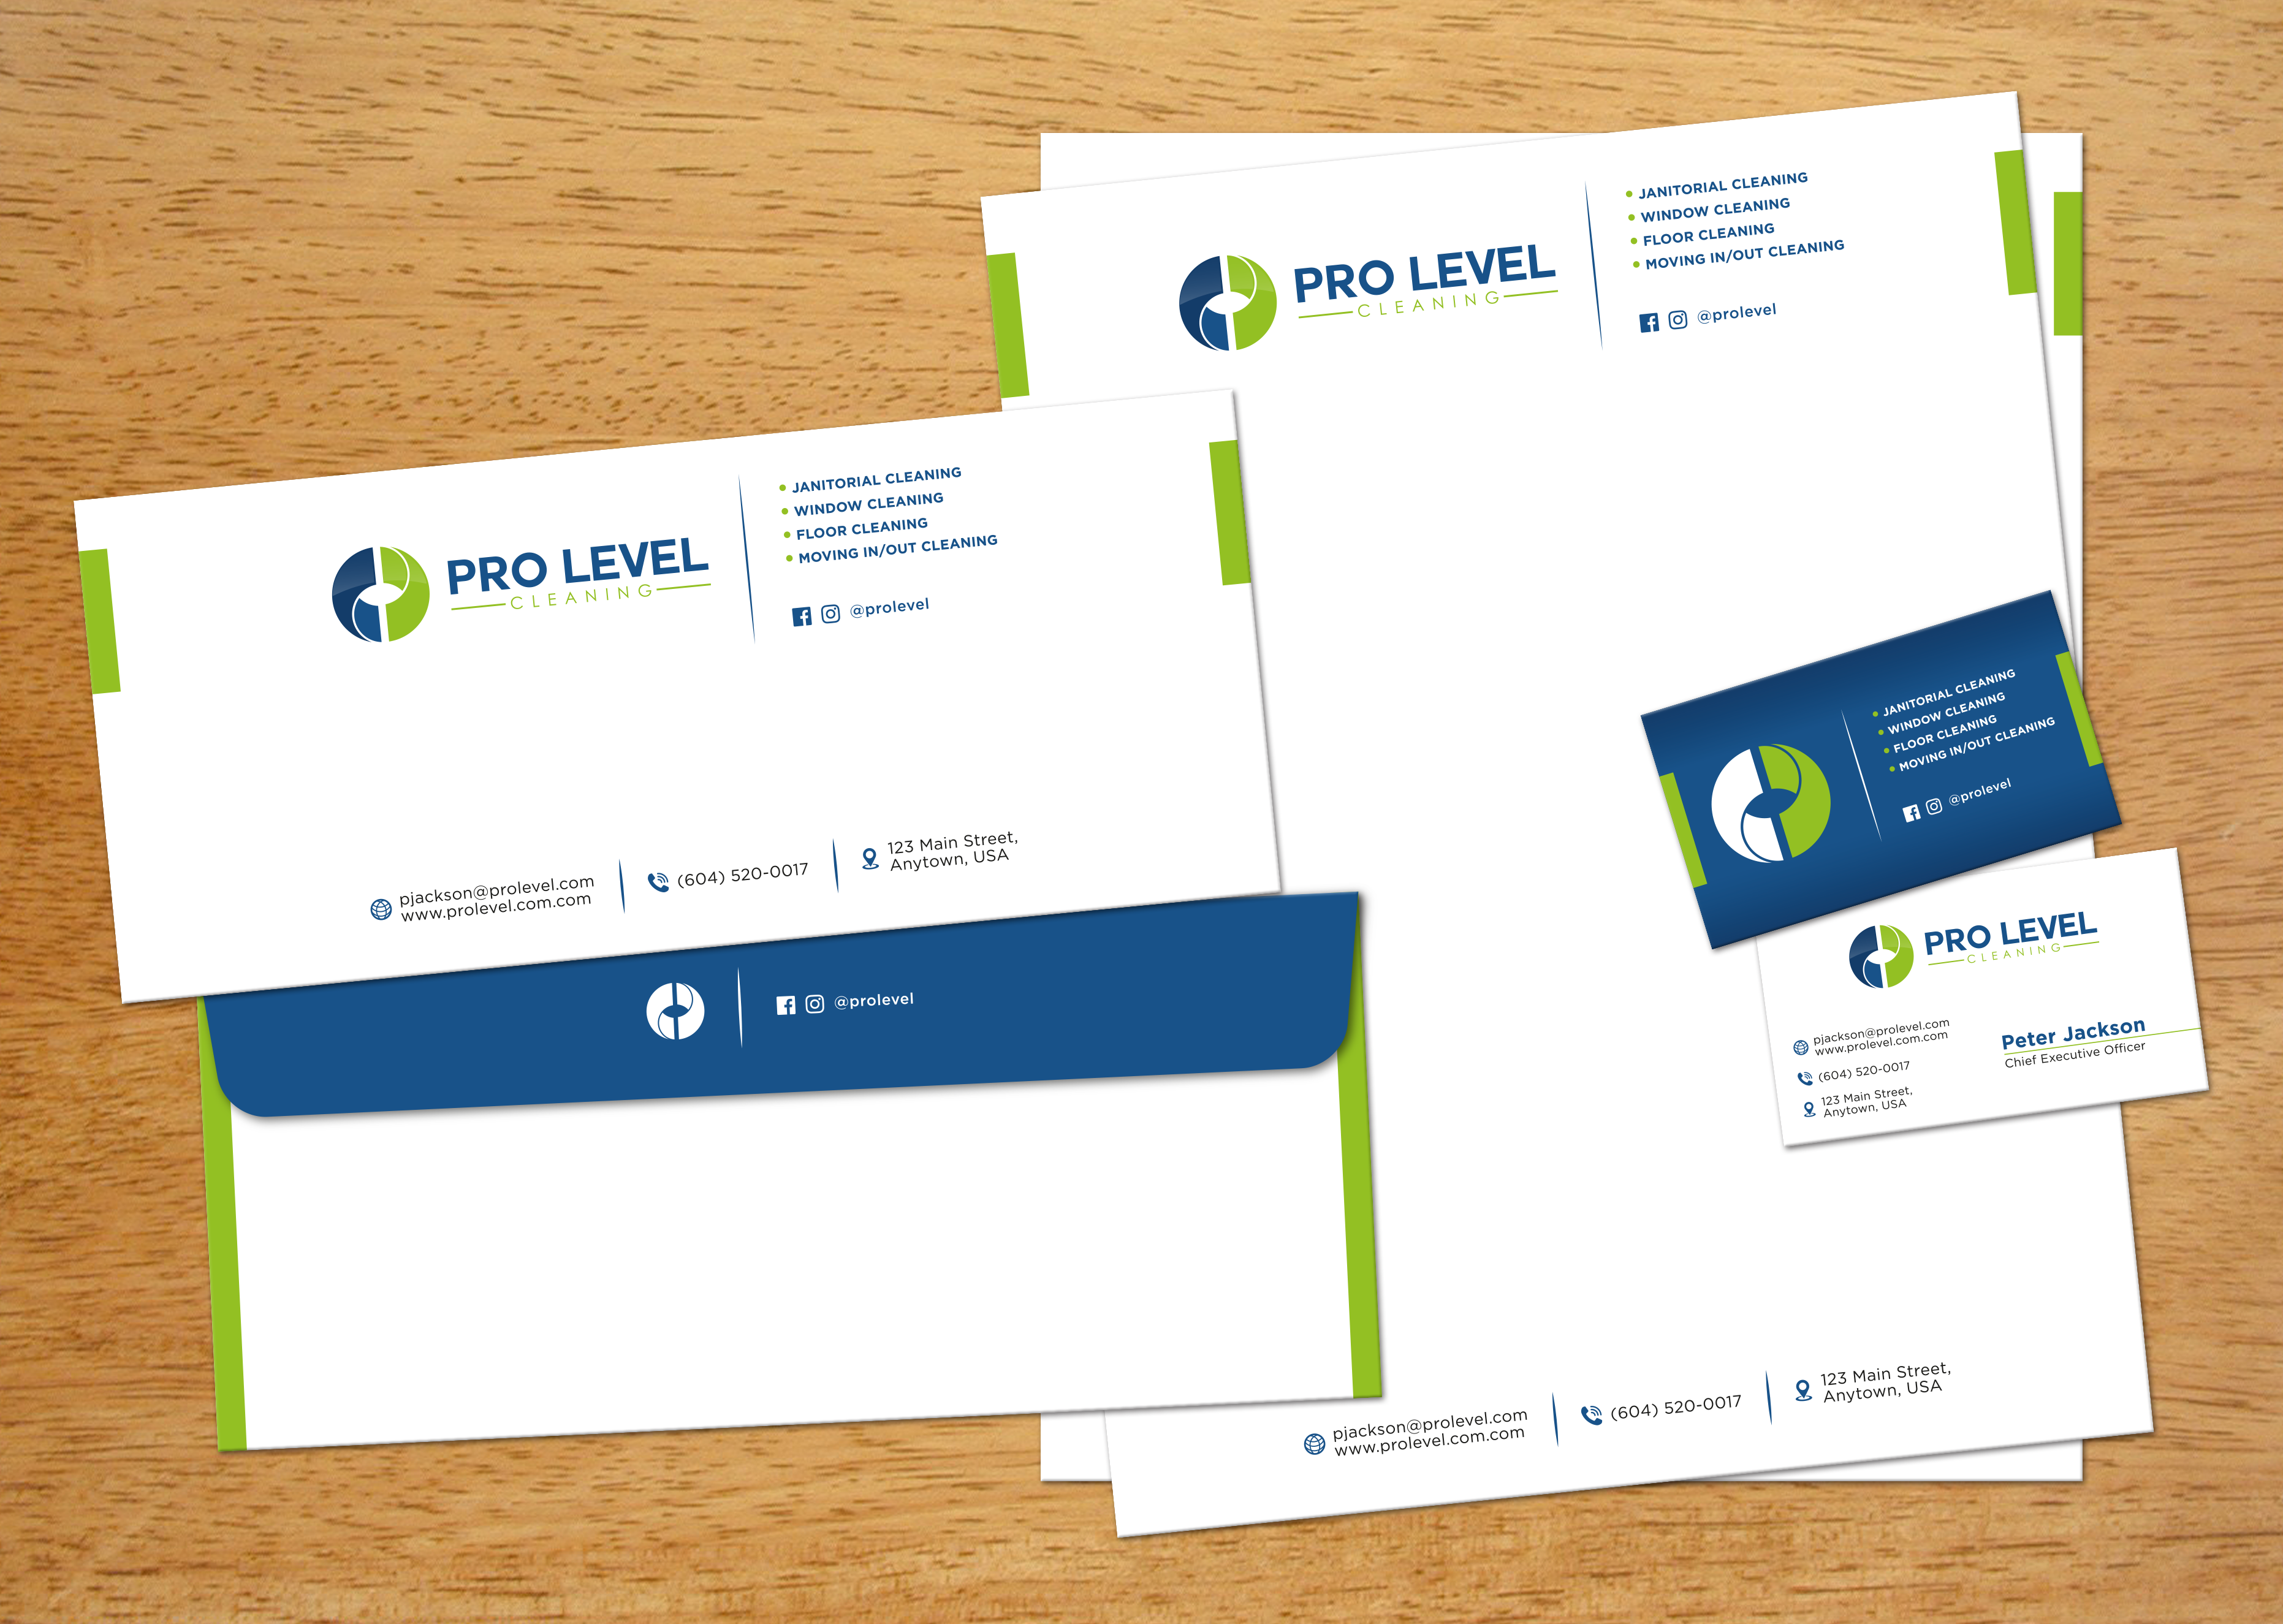 Pro Level stationery fmr-1.png